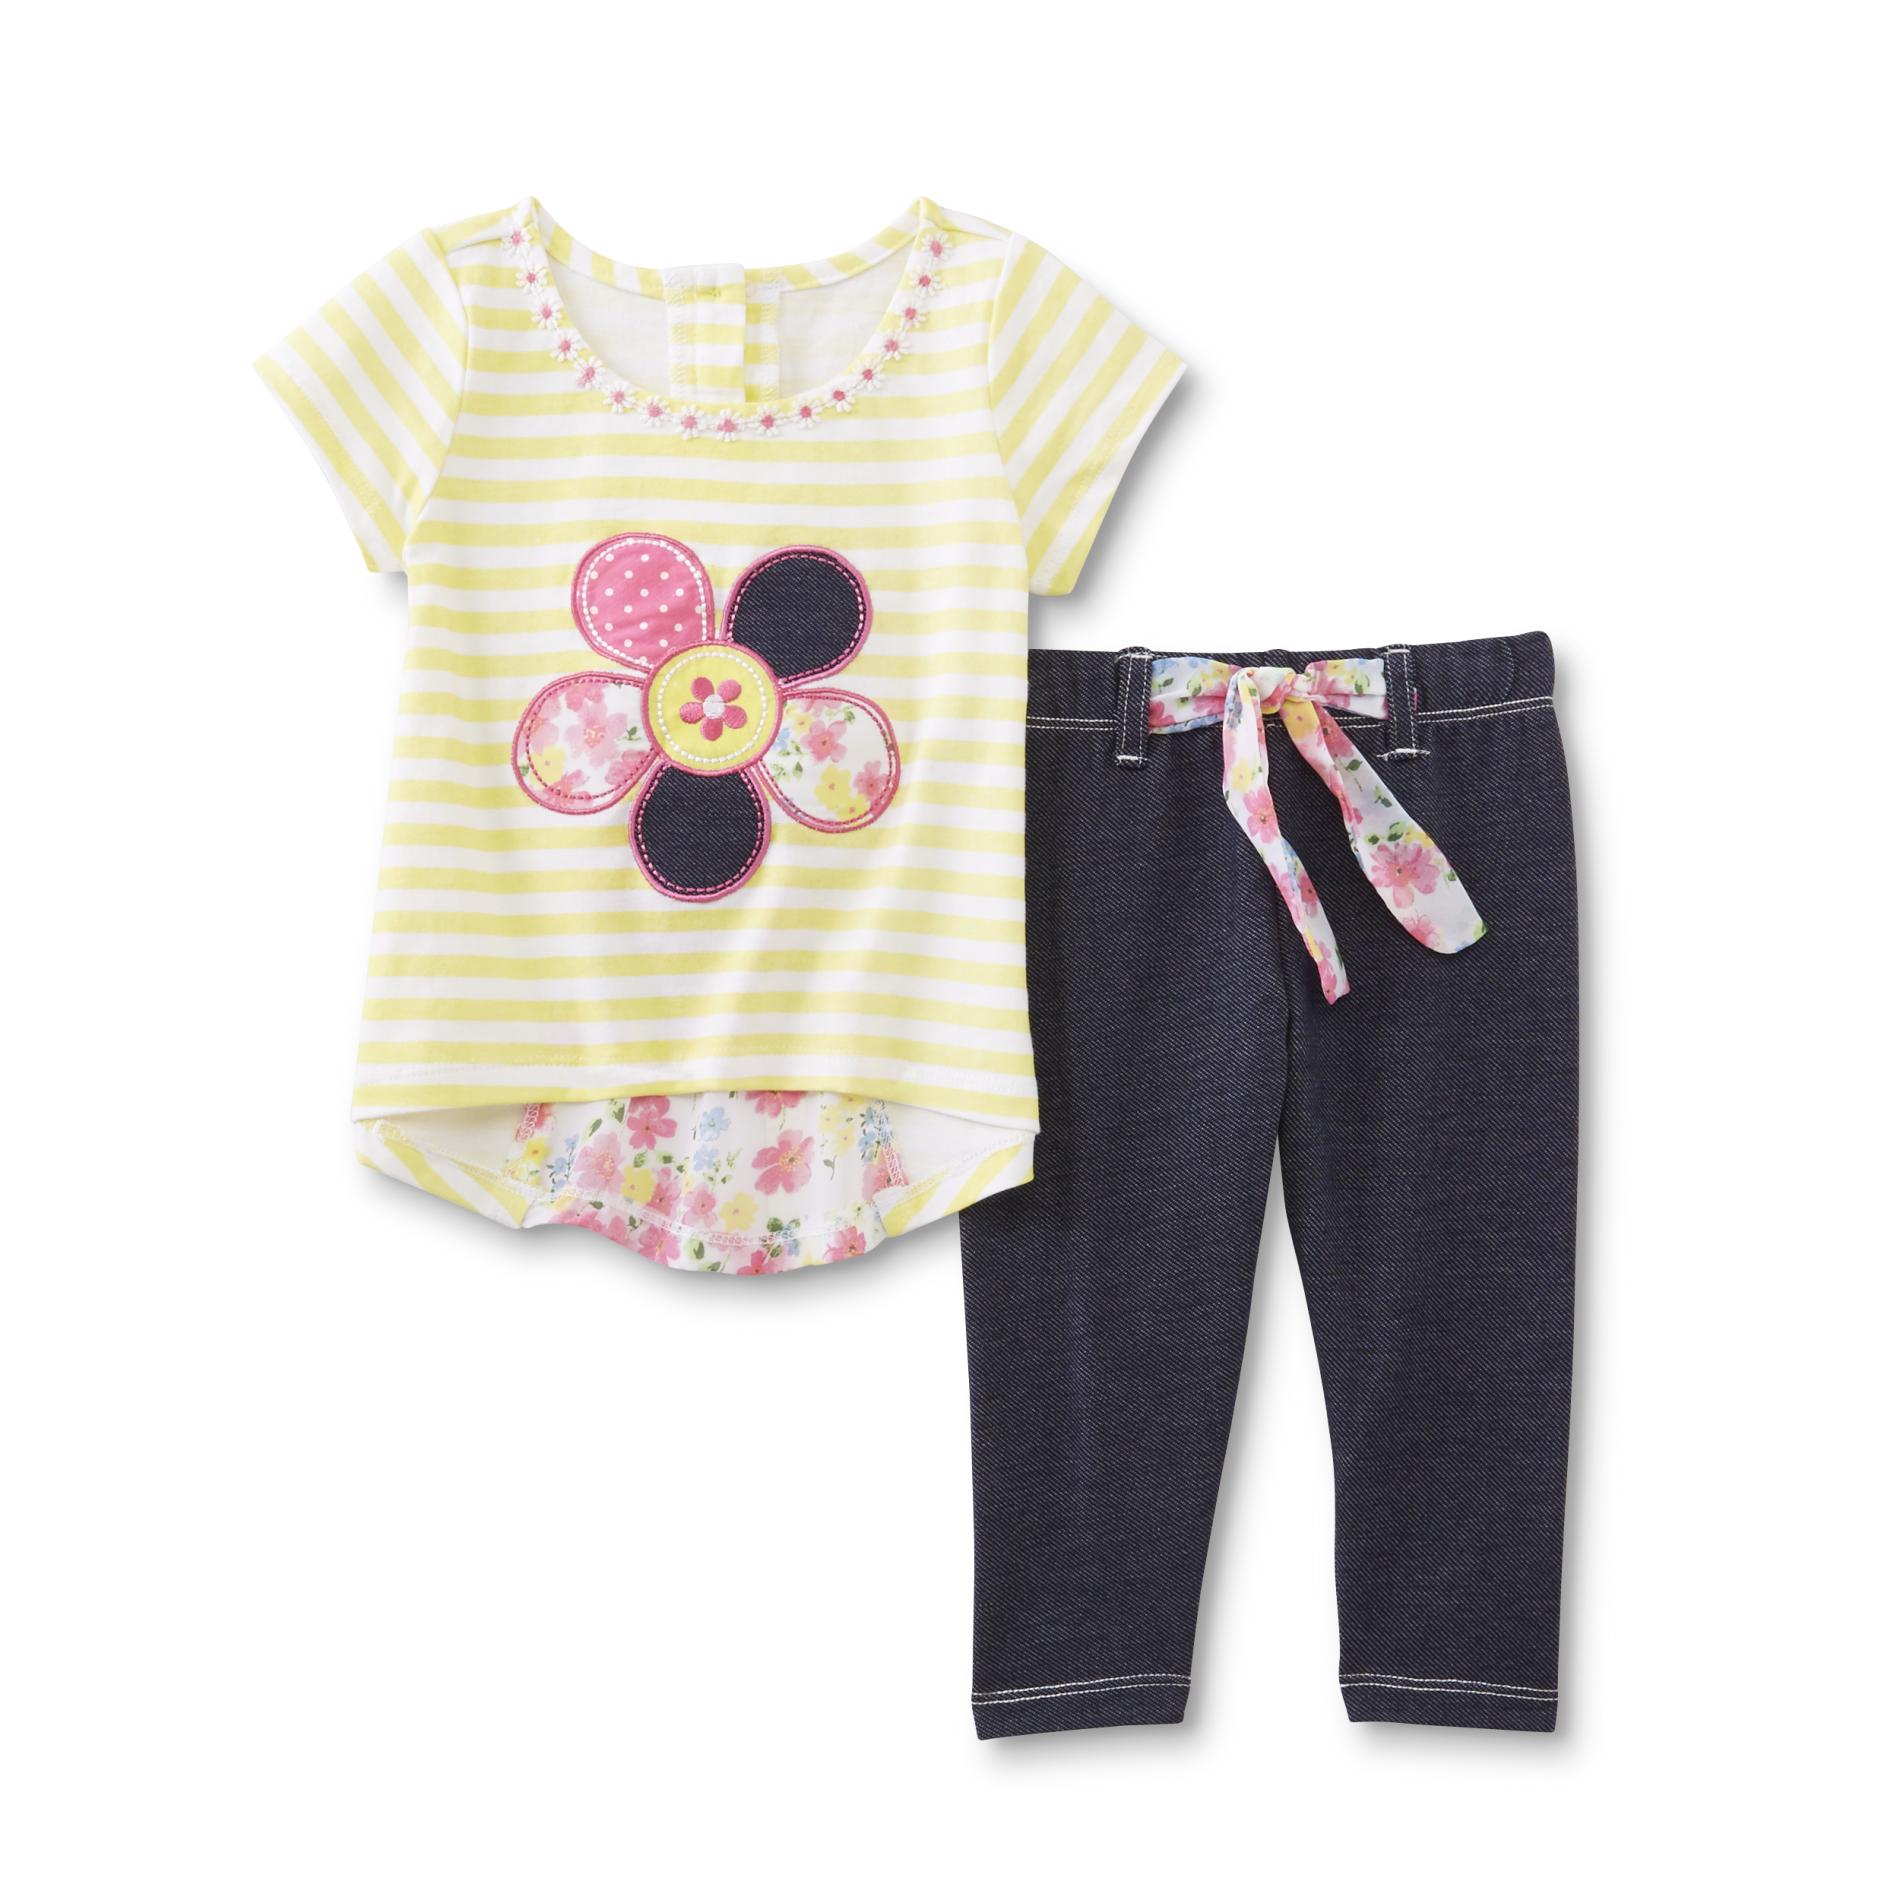 Young Hearts Infant & Toddler Girl's High-Low Top & Leggings - Striped